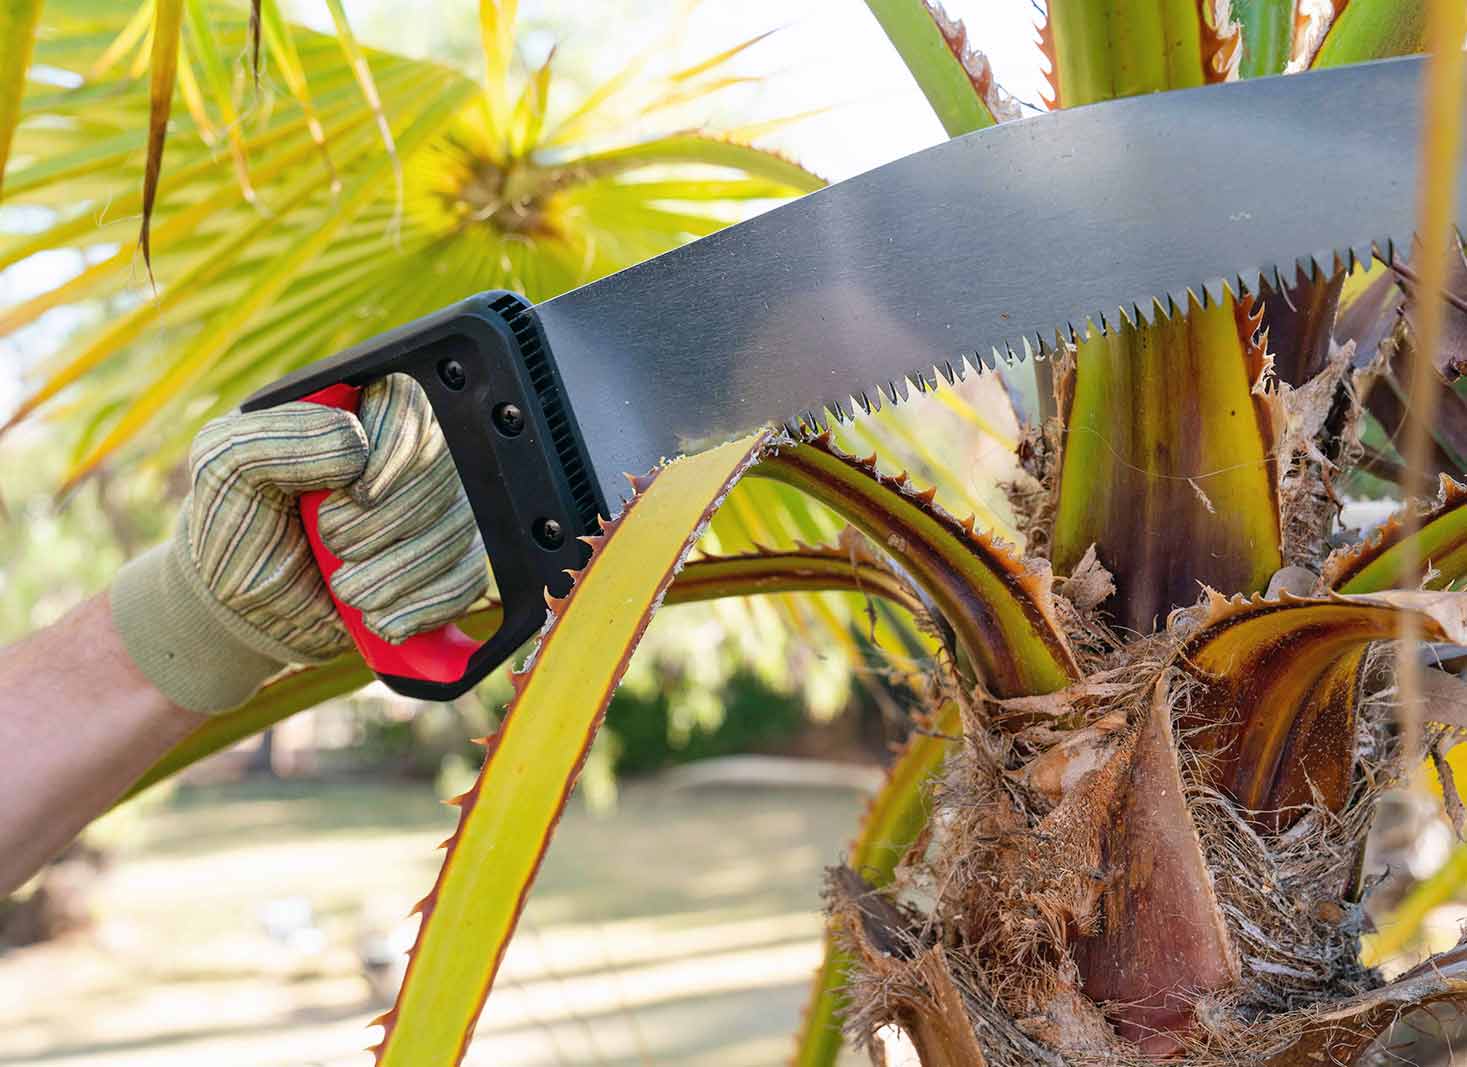 Factors affecting palm tree trimming costs in Georgia